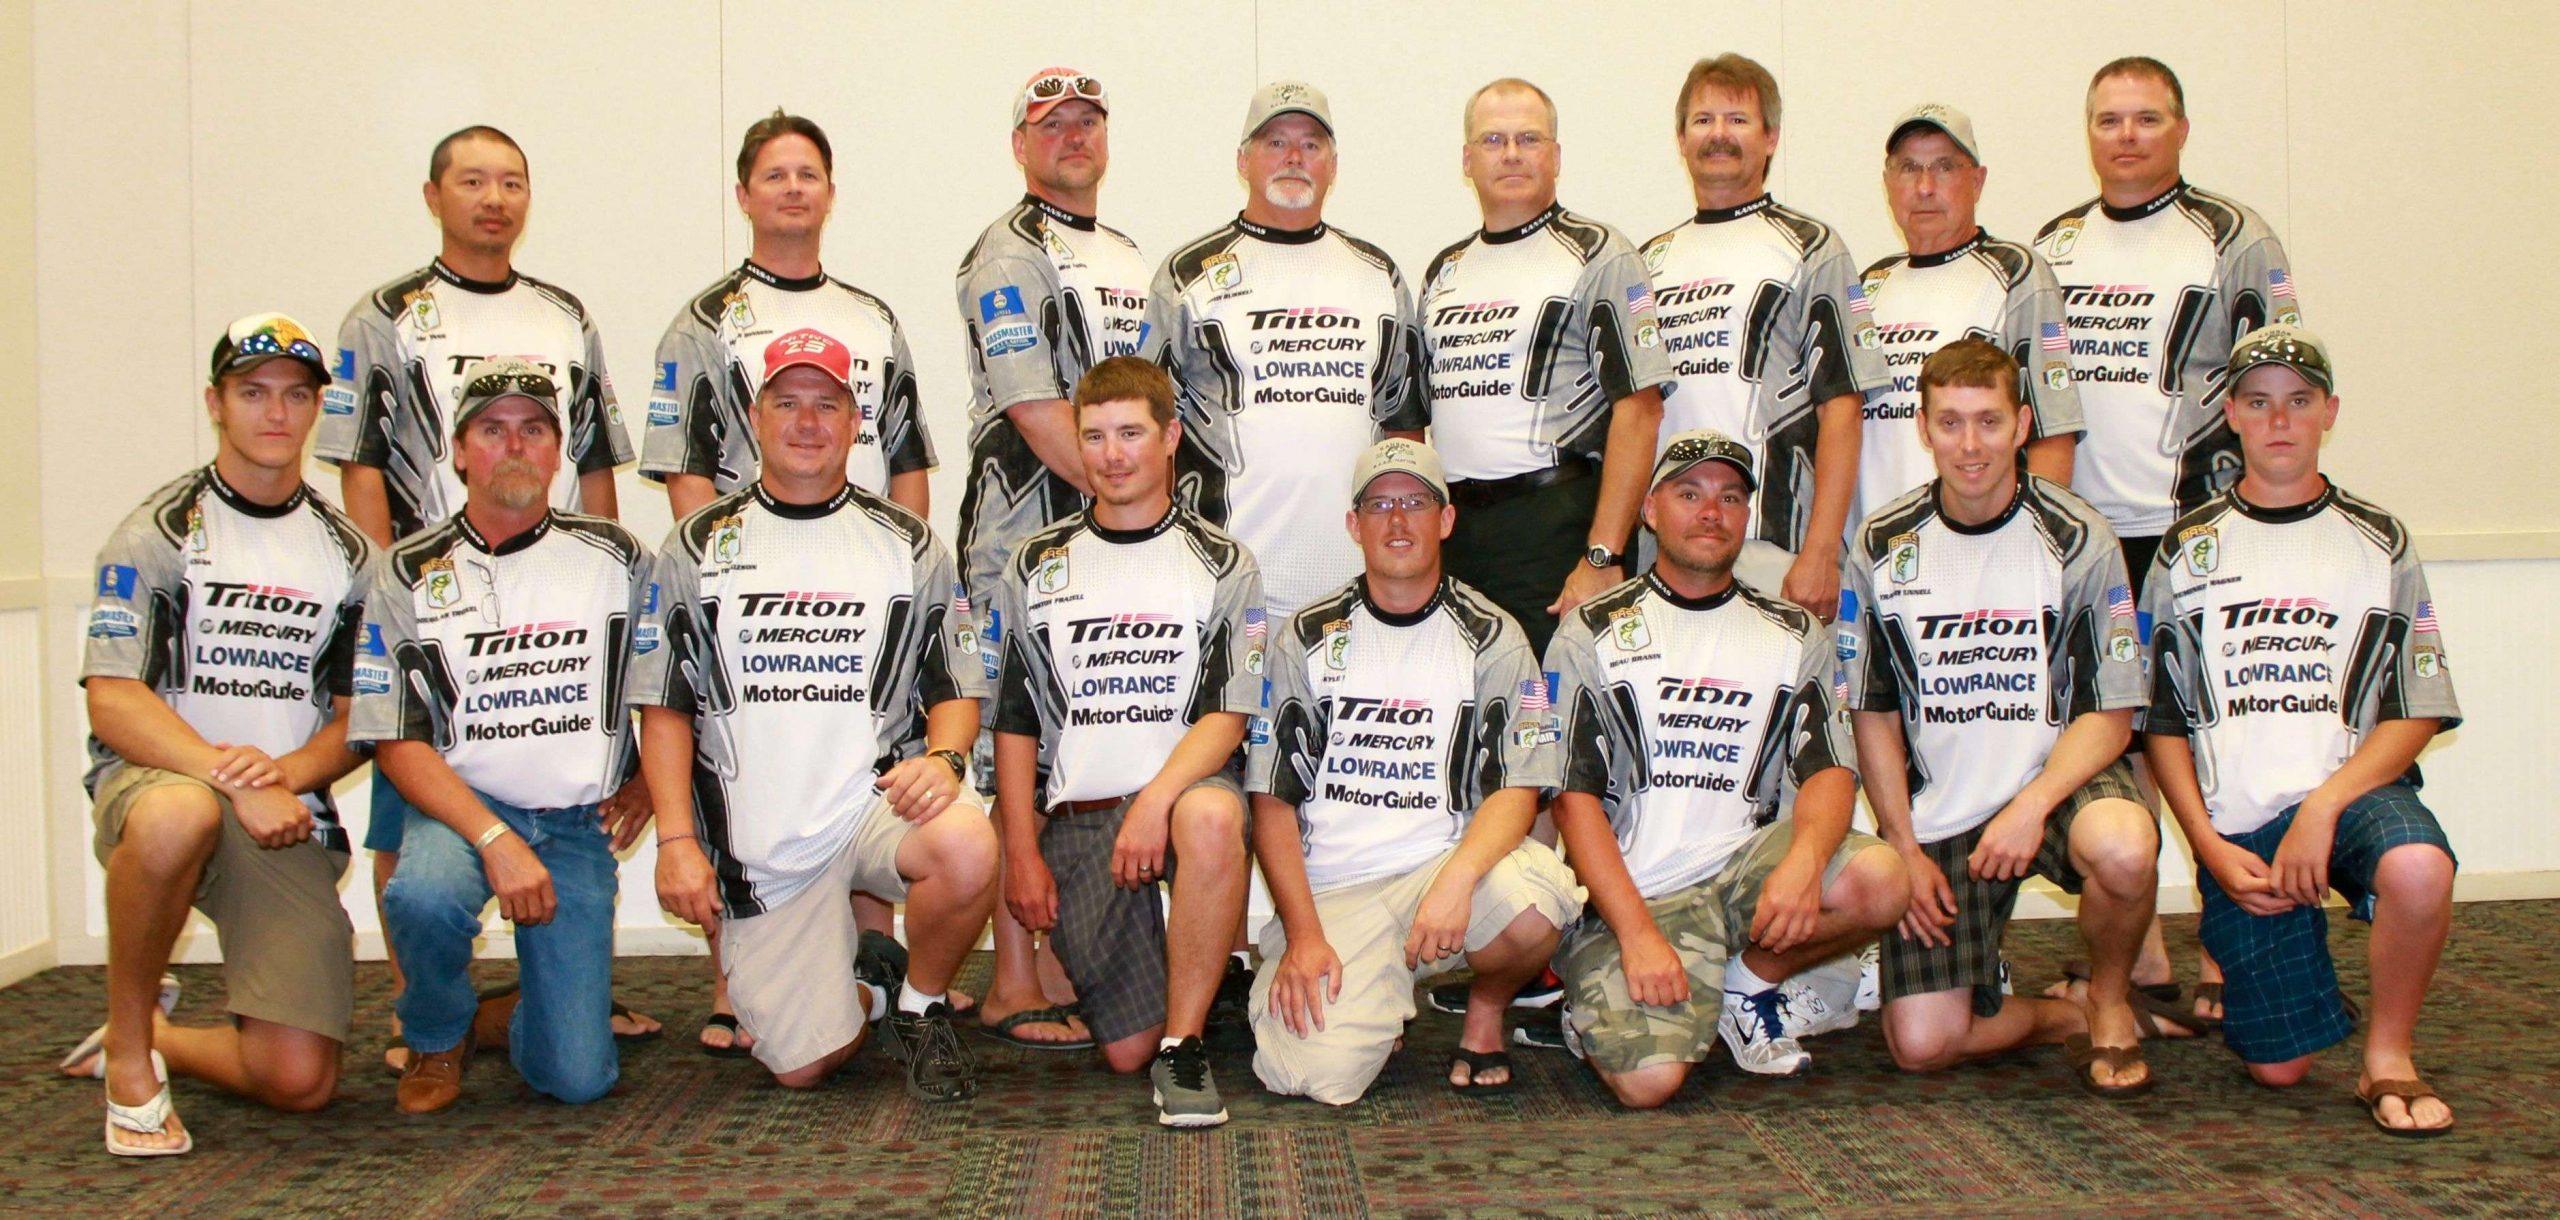 The Kansas B.A.S.S. Nation Central Divisional team comprises: (Back row, l to r) Abe Yang, Jeremy Dineen, Brian Penning, John Russell,Don Leatherman (president), Joel Porter, James Parsons, Kevin Miller; and (front row) Nick Luna (high school team), Doug Troxel, Chris Torkelson, Preston Frazell, Kyle Klein, Beau Branine, Travis Tunnell and Remington Wagner (high school team).